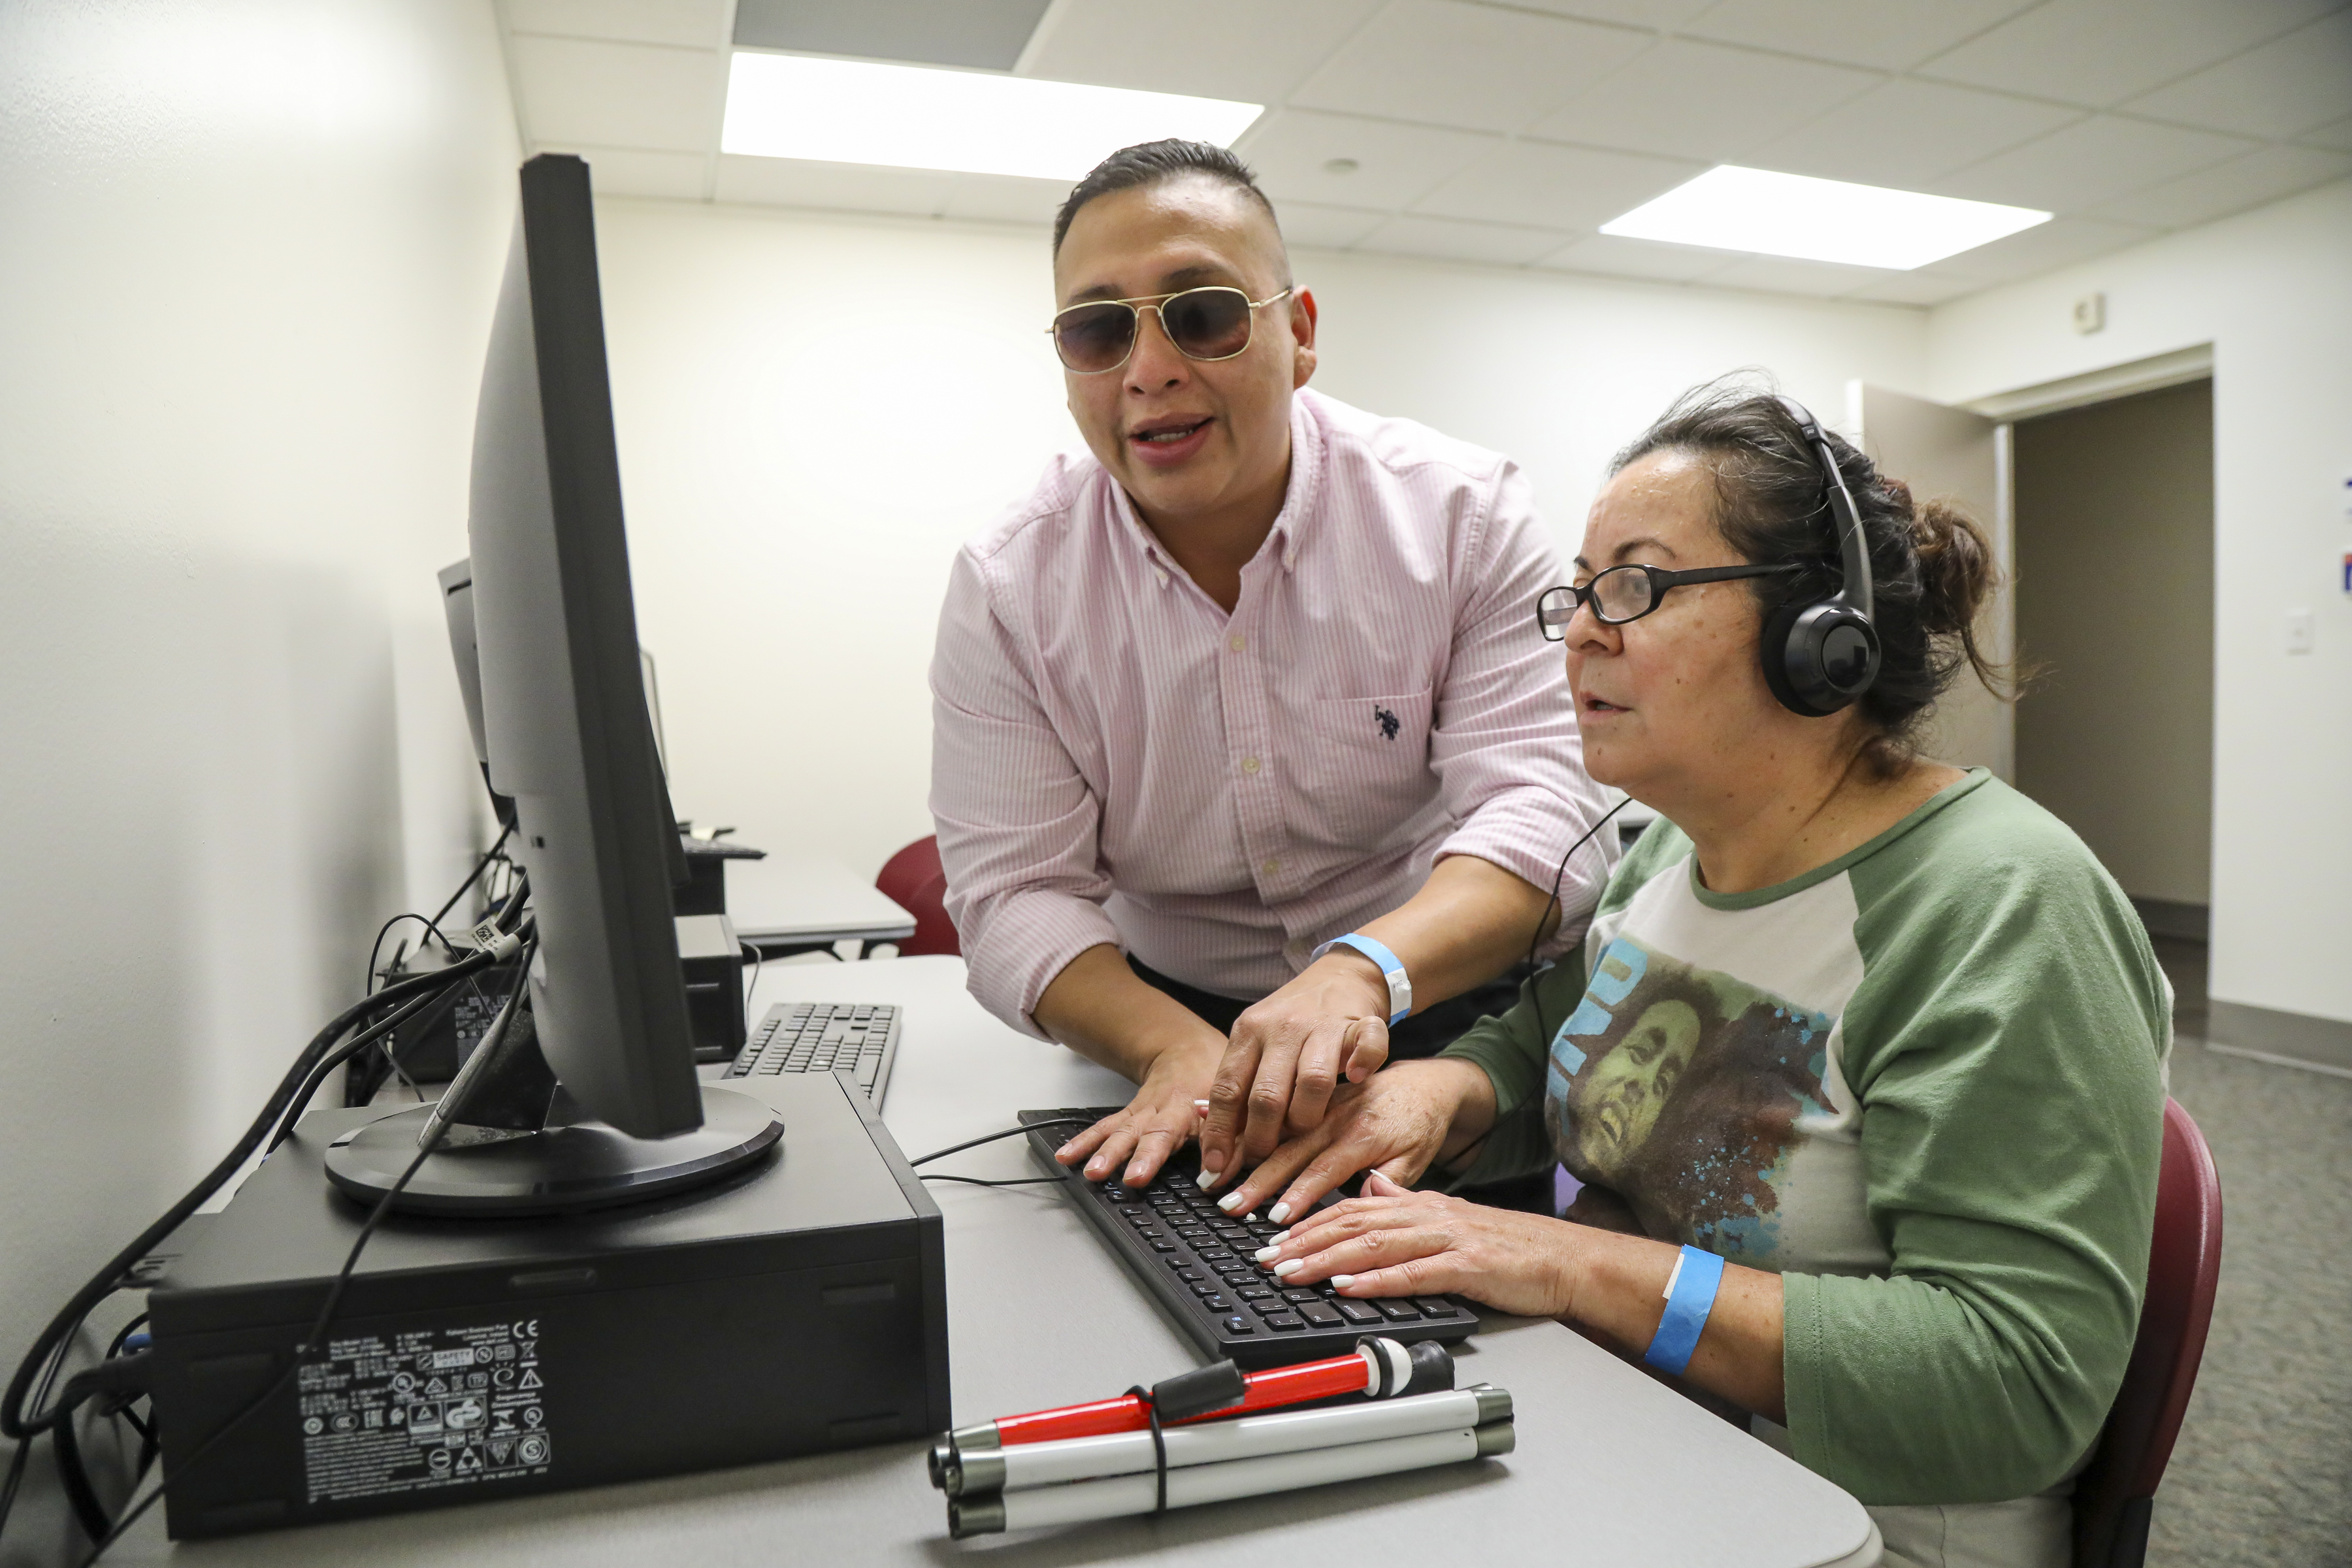 Guadalupe, a vocational rehabilitation client learns computer skills in order to work in a call center.